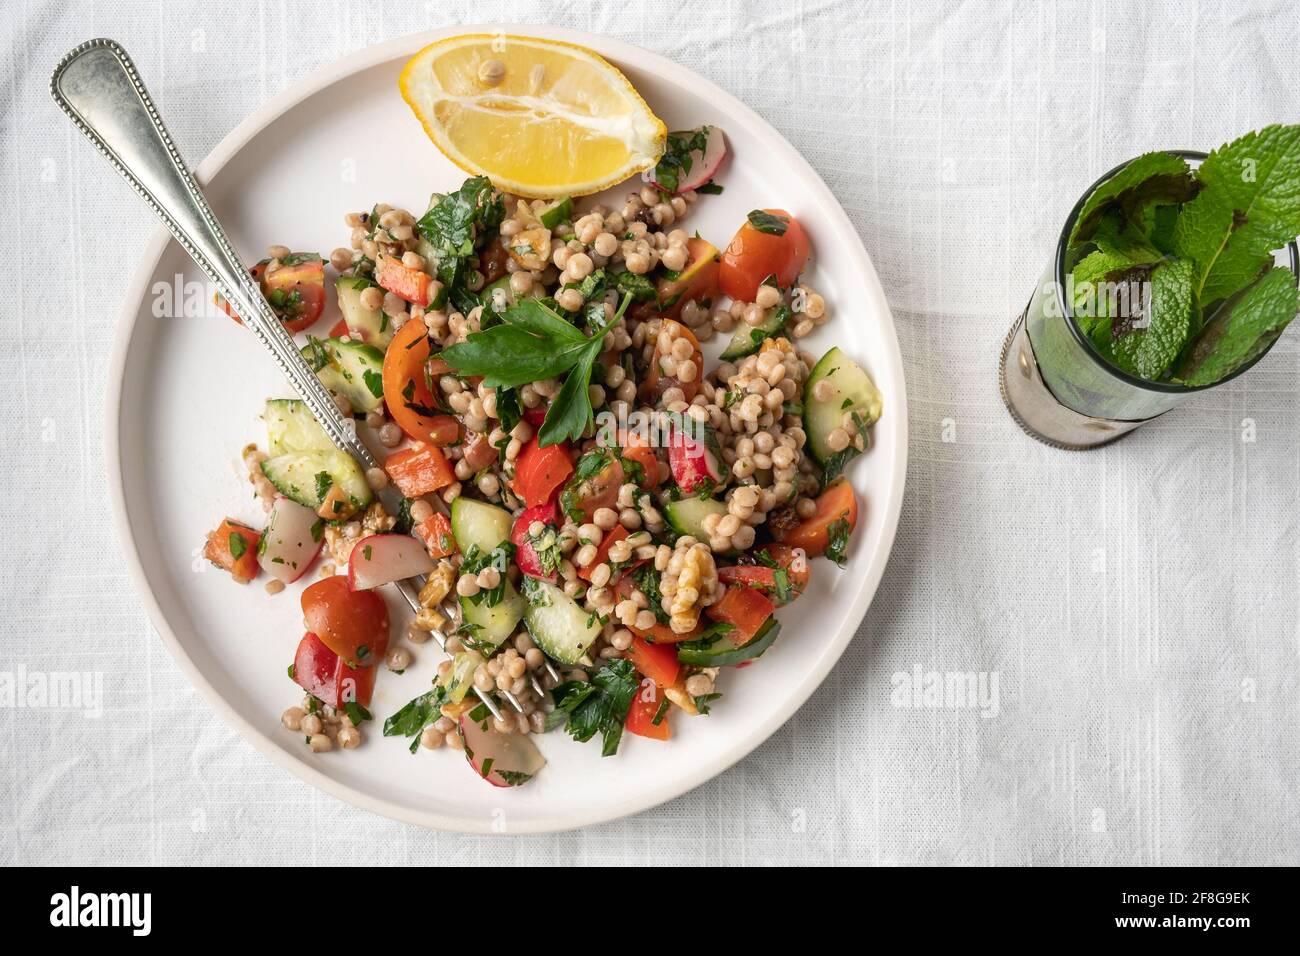 Flatlay of a single plate of a healthy vegan wholewheat pearl couscous salad with lemon and fresh vegetables on a white plate served with mint tea on Stock Photo